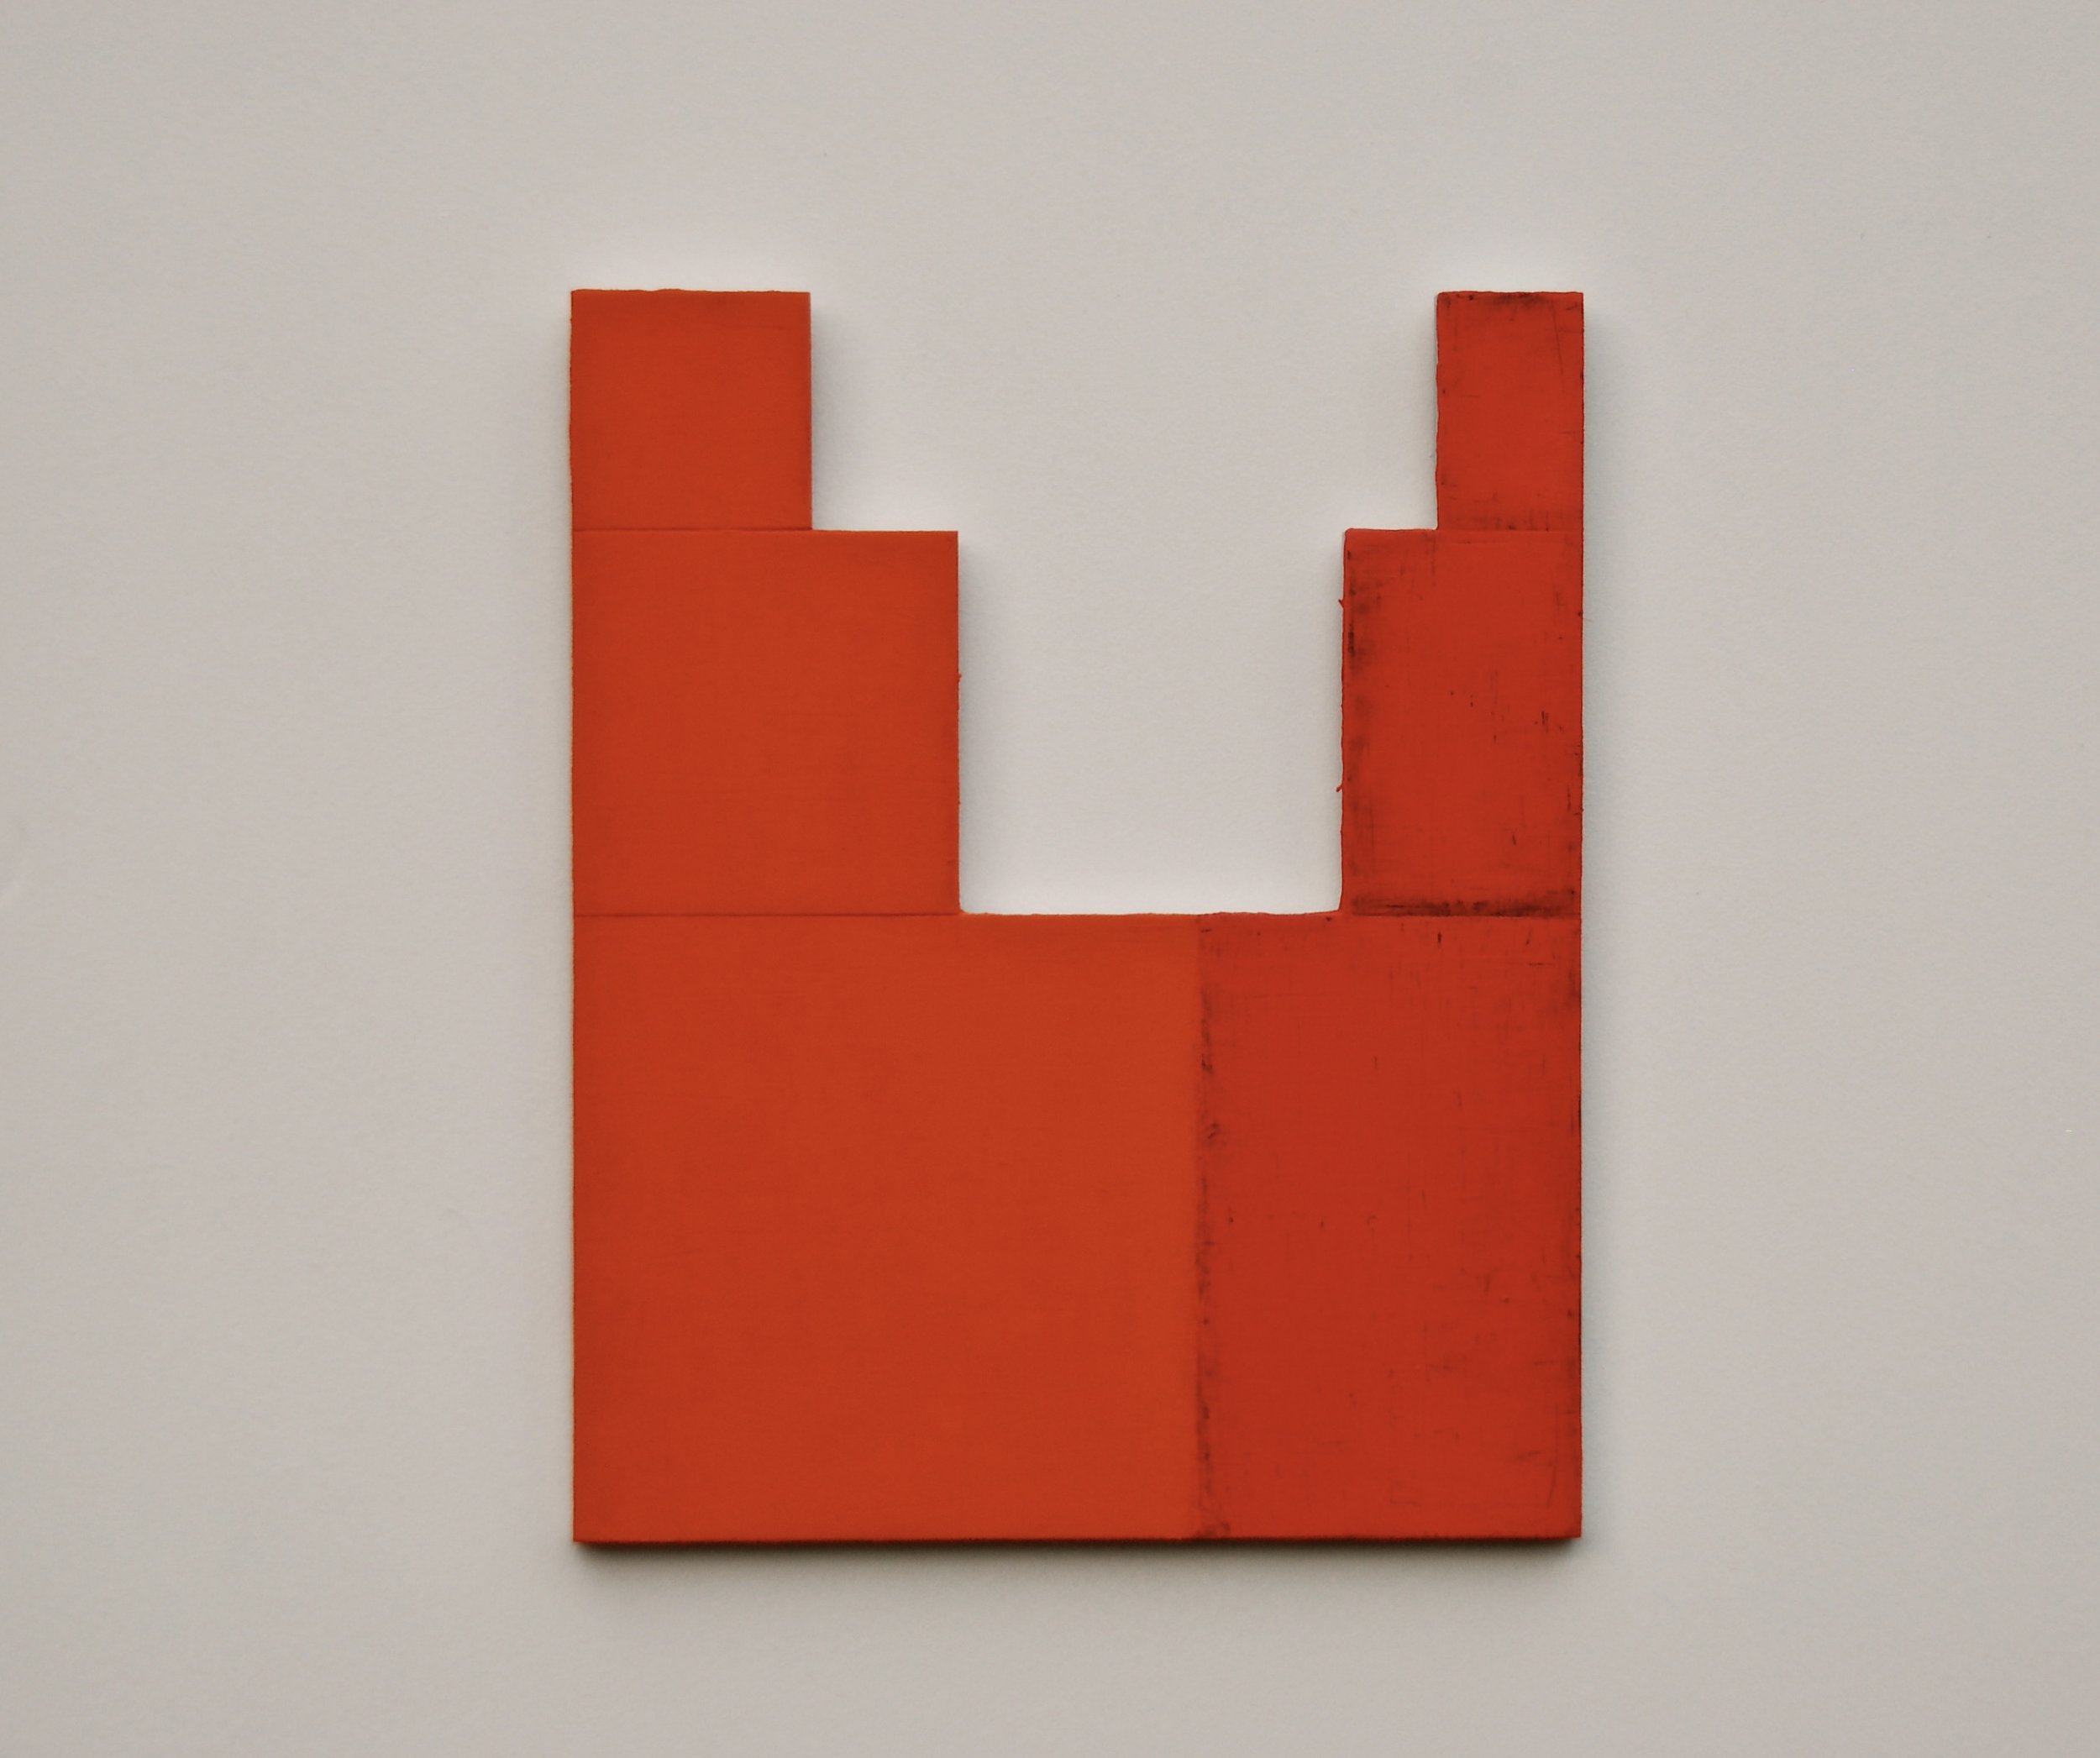    Orange Stack     oil, plywood    17 x 14  inches  